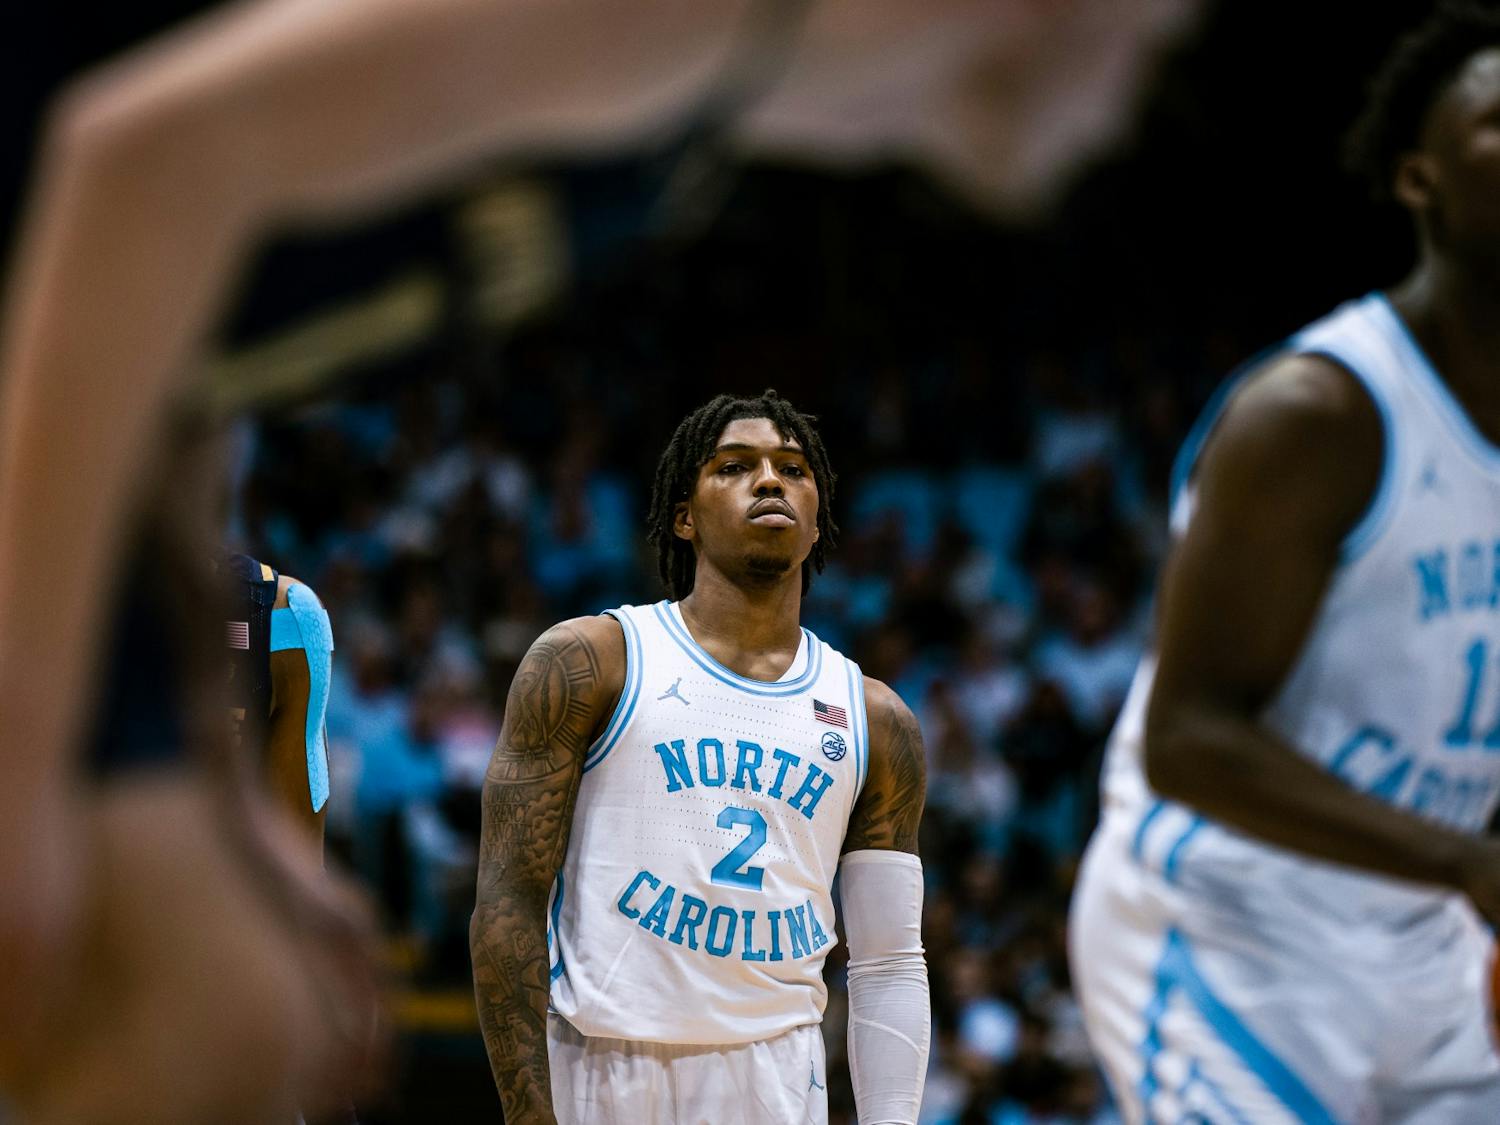 UNC junior Caleb Love (2) watches sophomore teammate D'Marco Dunn (11) take a free throw at the men's basketball game against Notre Dame on Saturday, Jan. 7, 2023. UNC won 81-64 at the Dean Smith Center.